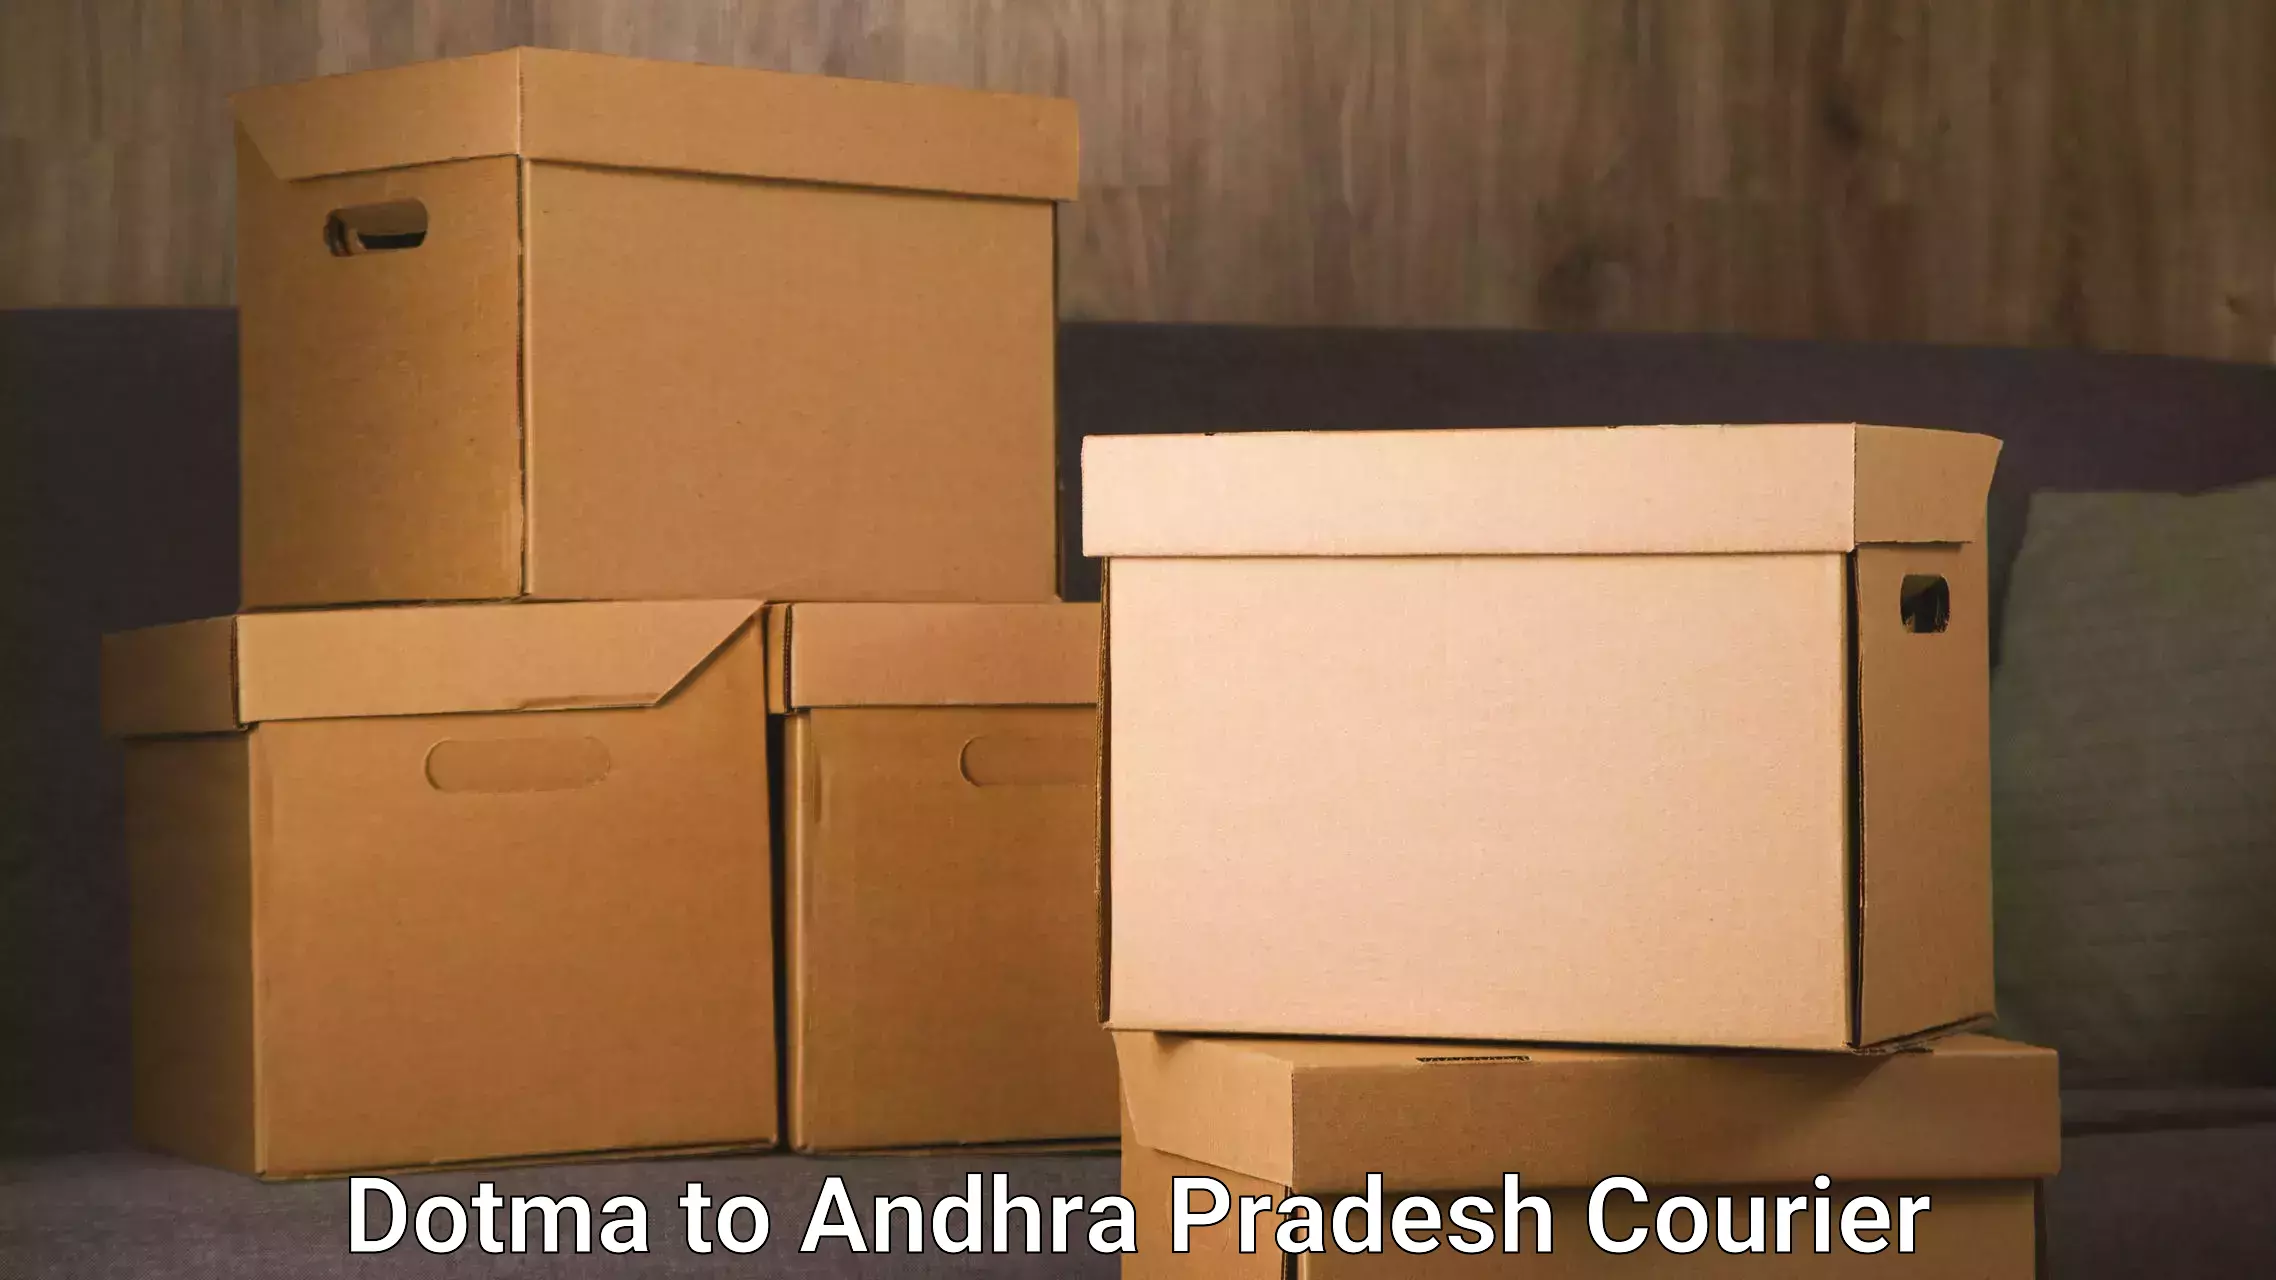 State-of-the-art courier technology Dotma to Andhra Pradesh